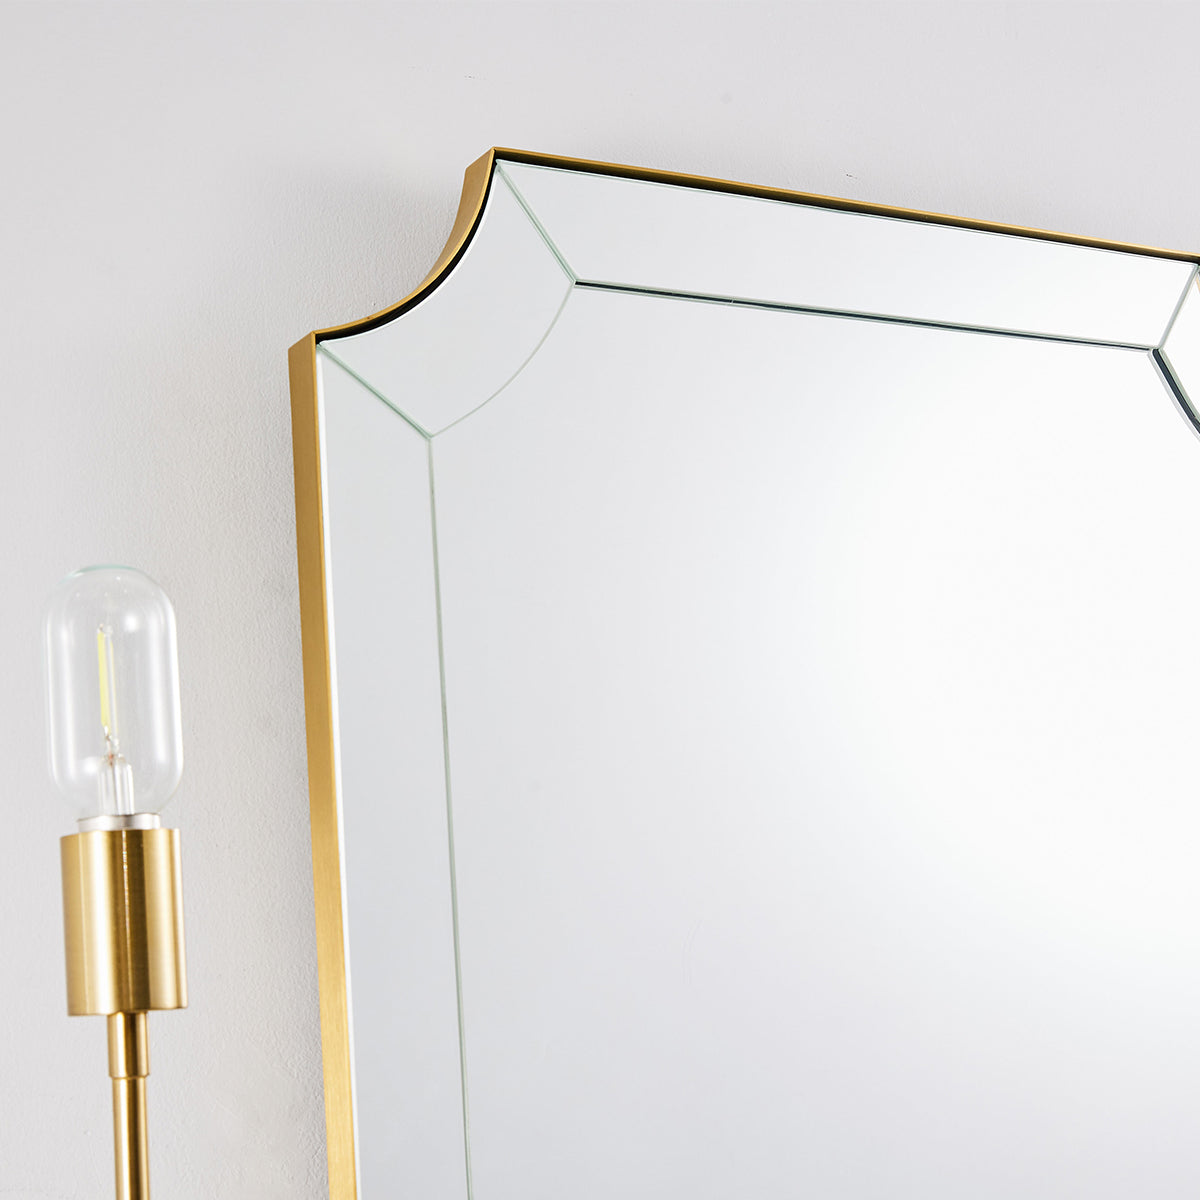 Minuette Scalloped Bathroom Decor Wall Mirrors Brushed Gold | Stainless Steel Frame